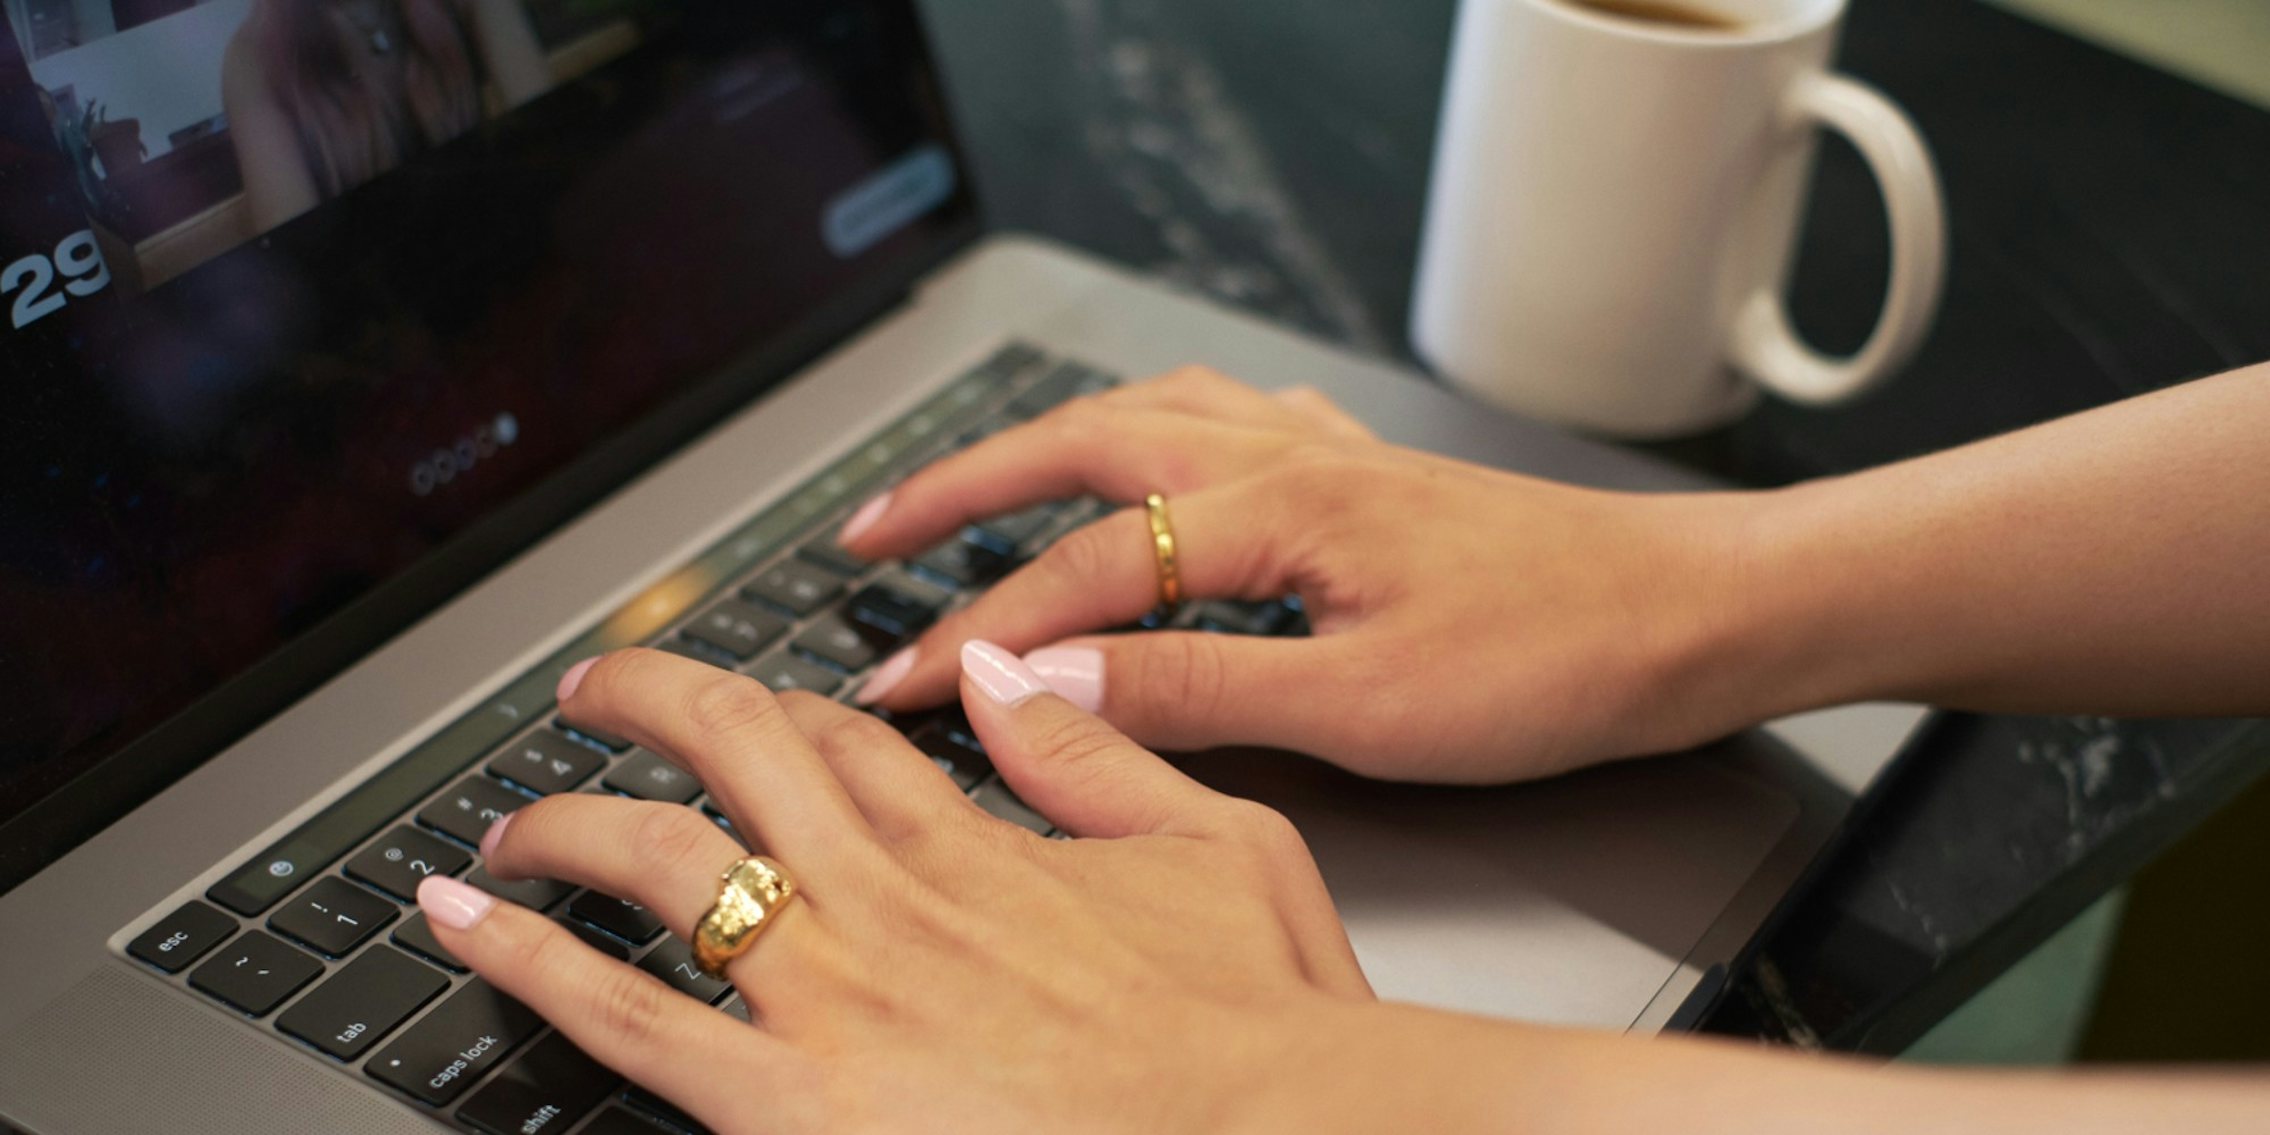 Person's hands with pink nails and rings typing on laptop